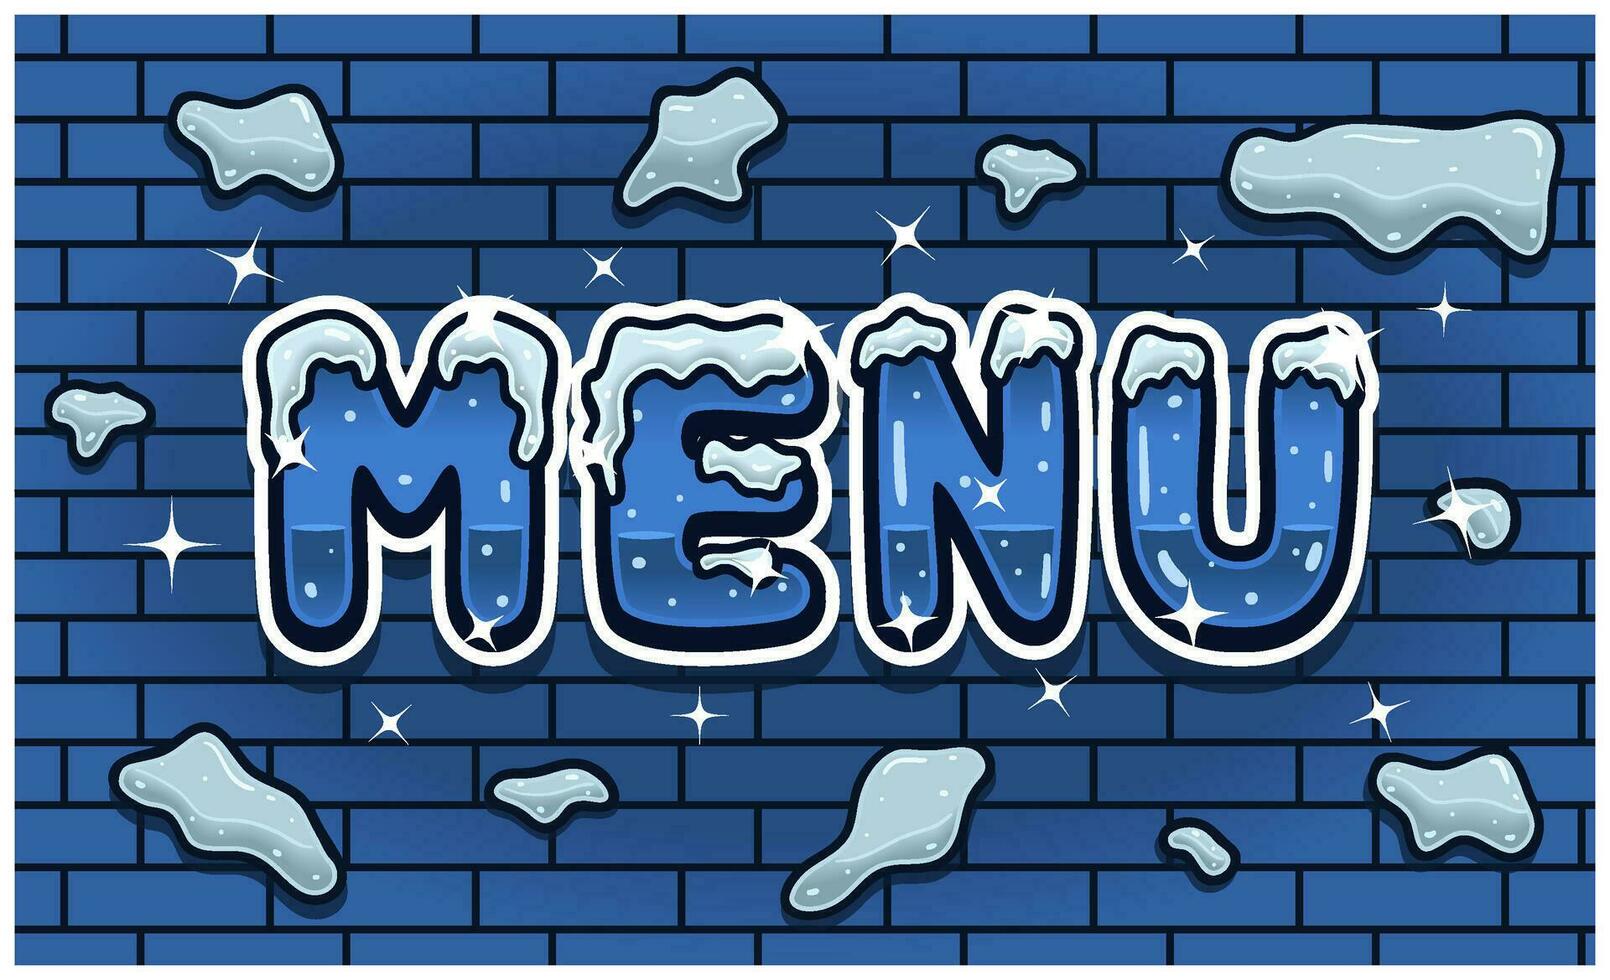 Menu Lettering With Snow Ice Font In Brick Wall Background For Sign Template. Text Effect and Simple Gradients. vector